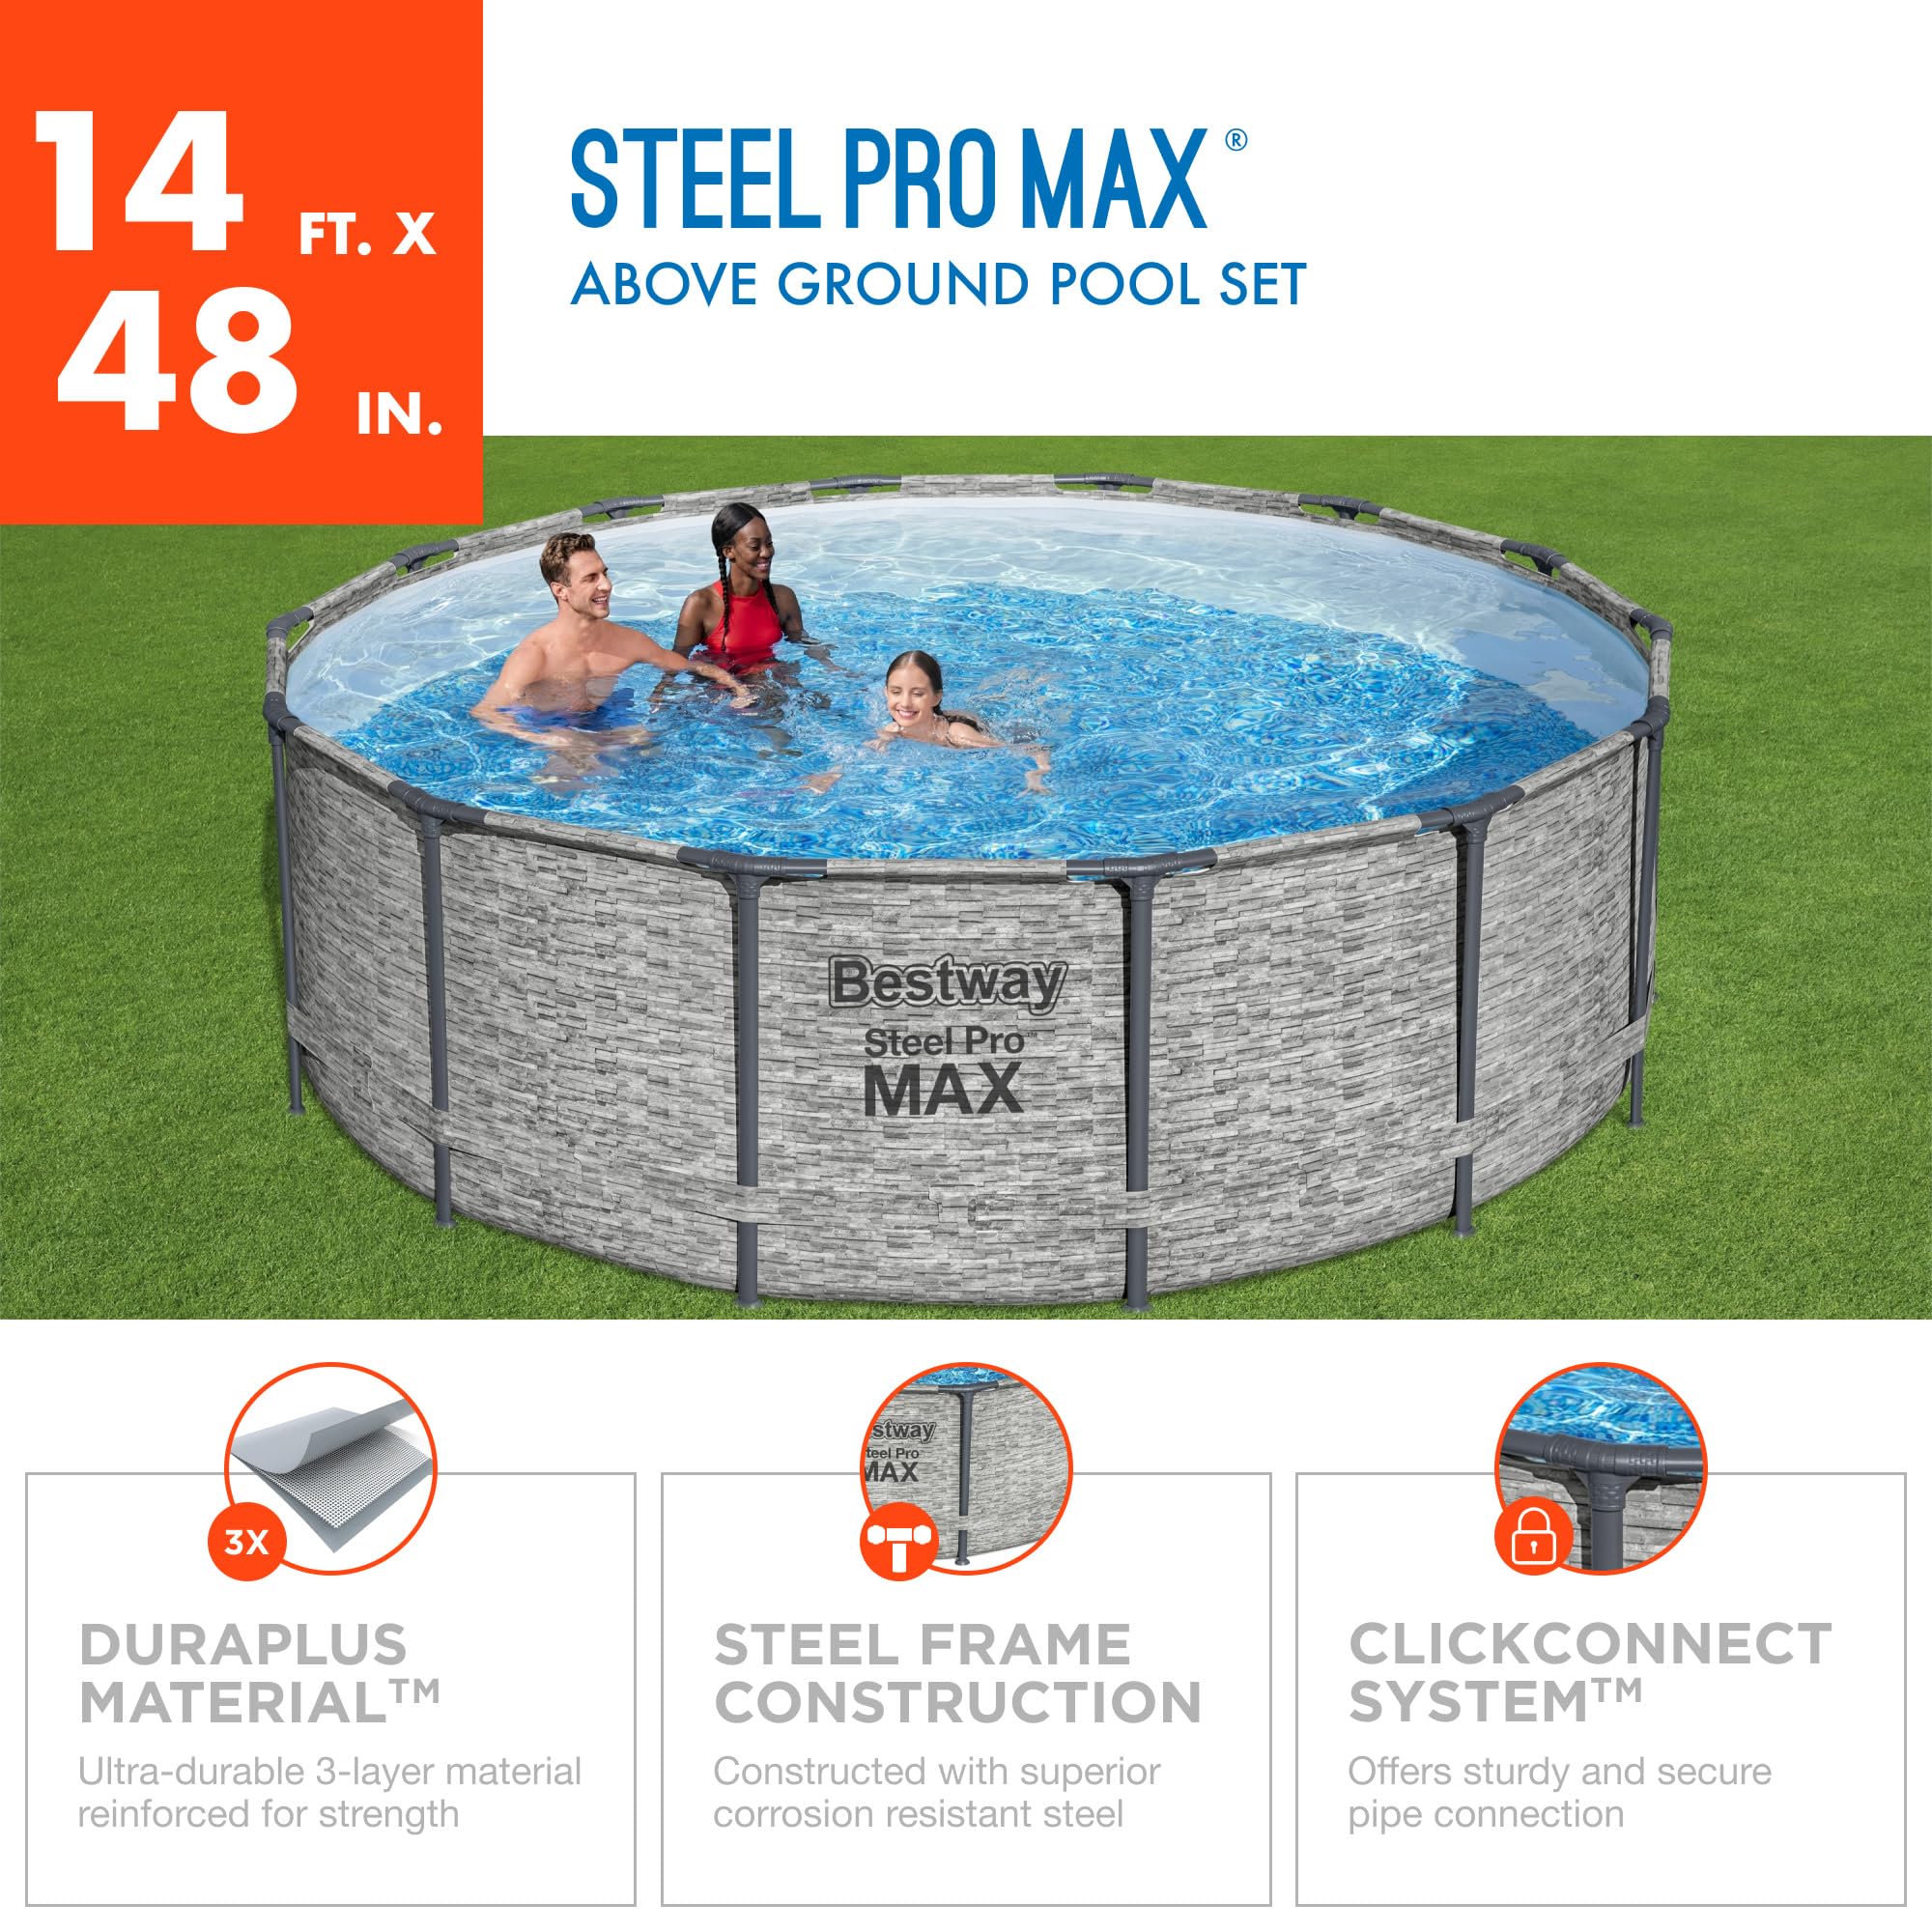 Bestway Steel Pro MAX 14 Foot x 48 Inch Round Metal Frame Above Ground Outdoor Swimming Pool Set with 1,000 Filter Pump, Ladder, and Cover, Gray